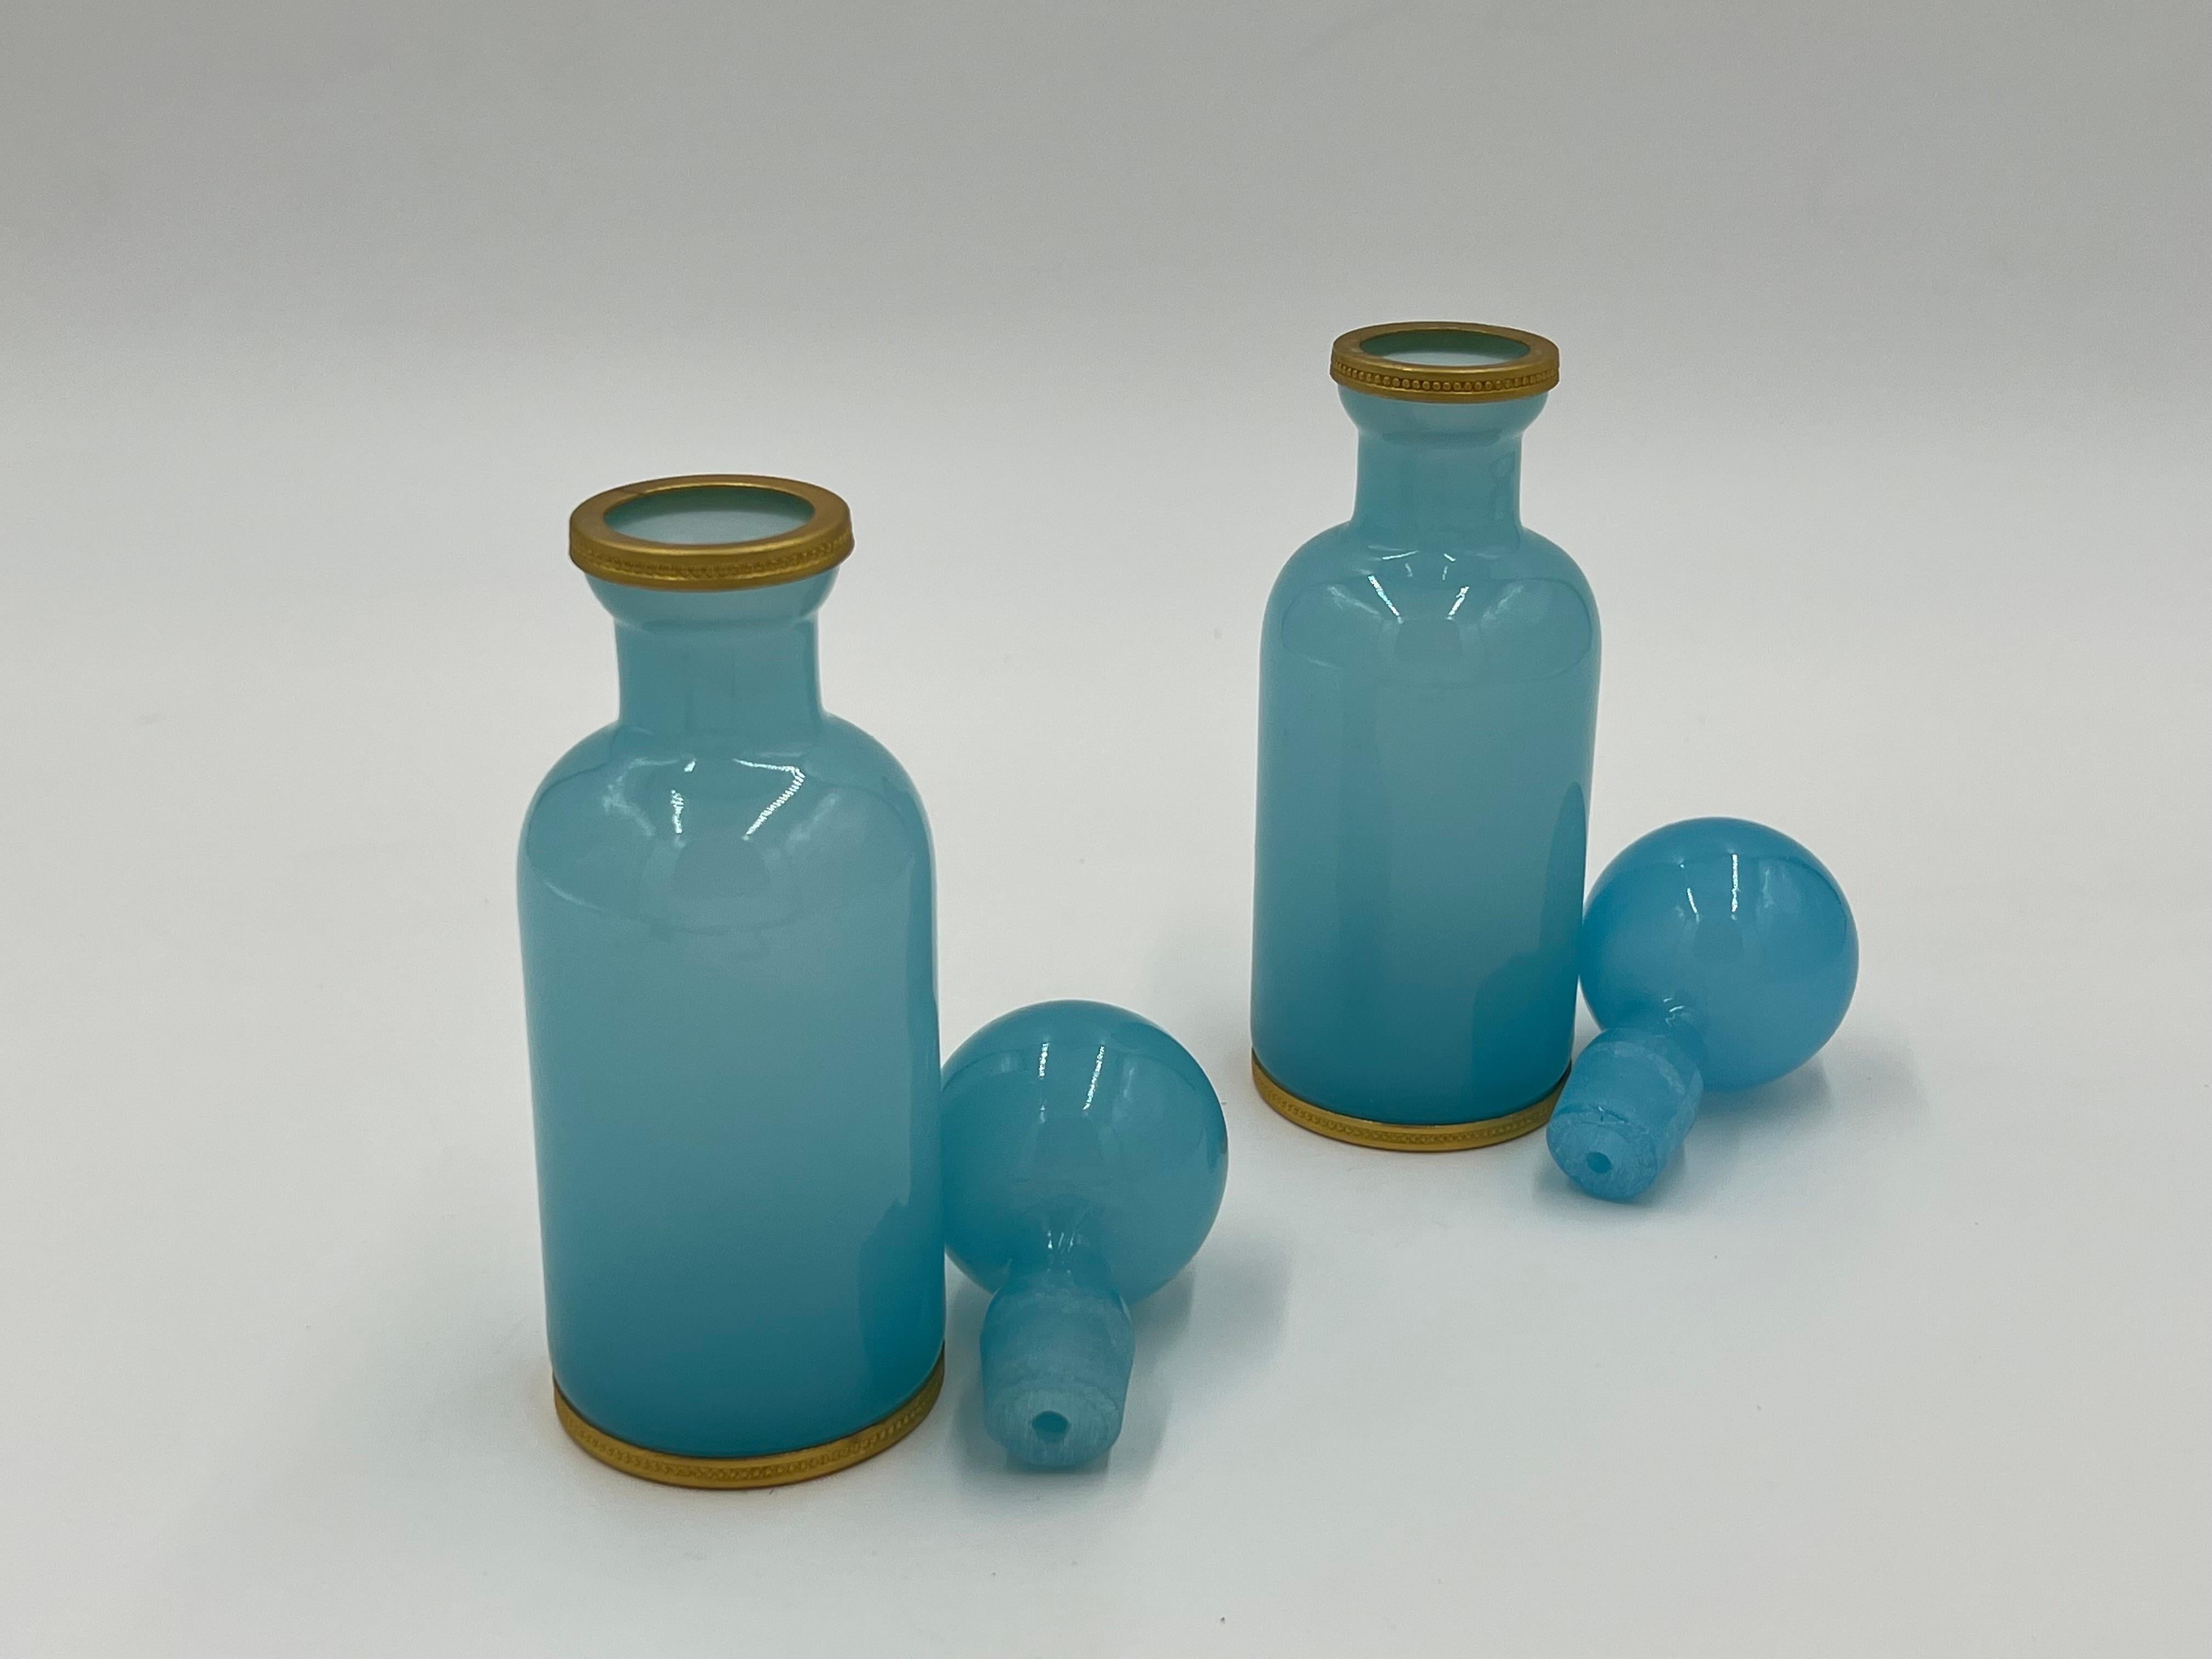 Pair, 19th century French blue opaline ormolu mounted glass perfume bottles. 
Each bottle with ormolu mounts to base and upper rims. Matched pair with no marks apparent. 
Measures: 7.5” H x 2.5” W.